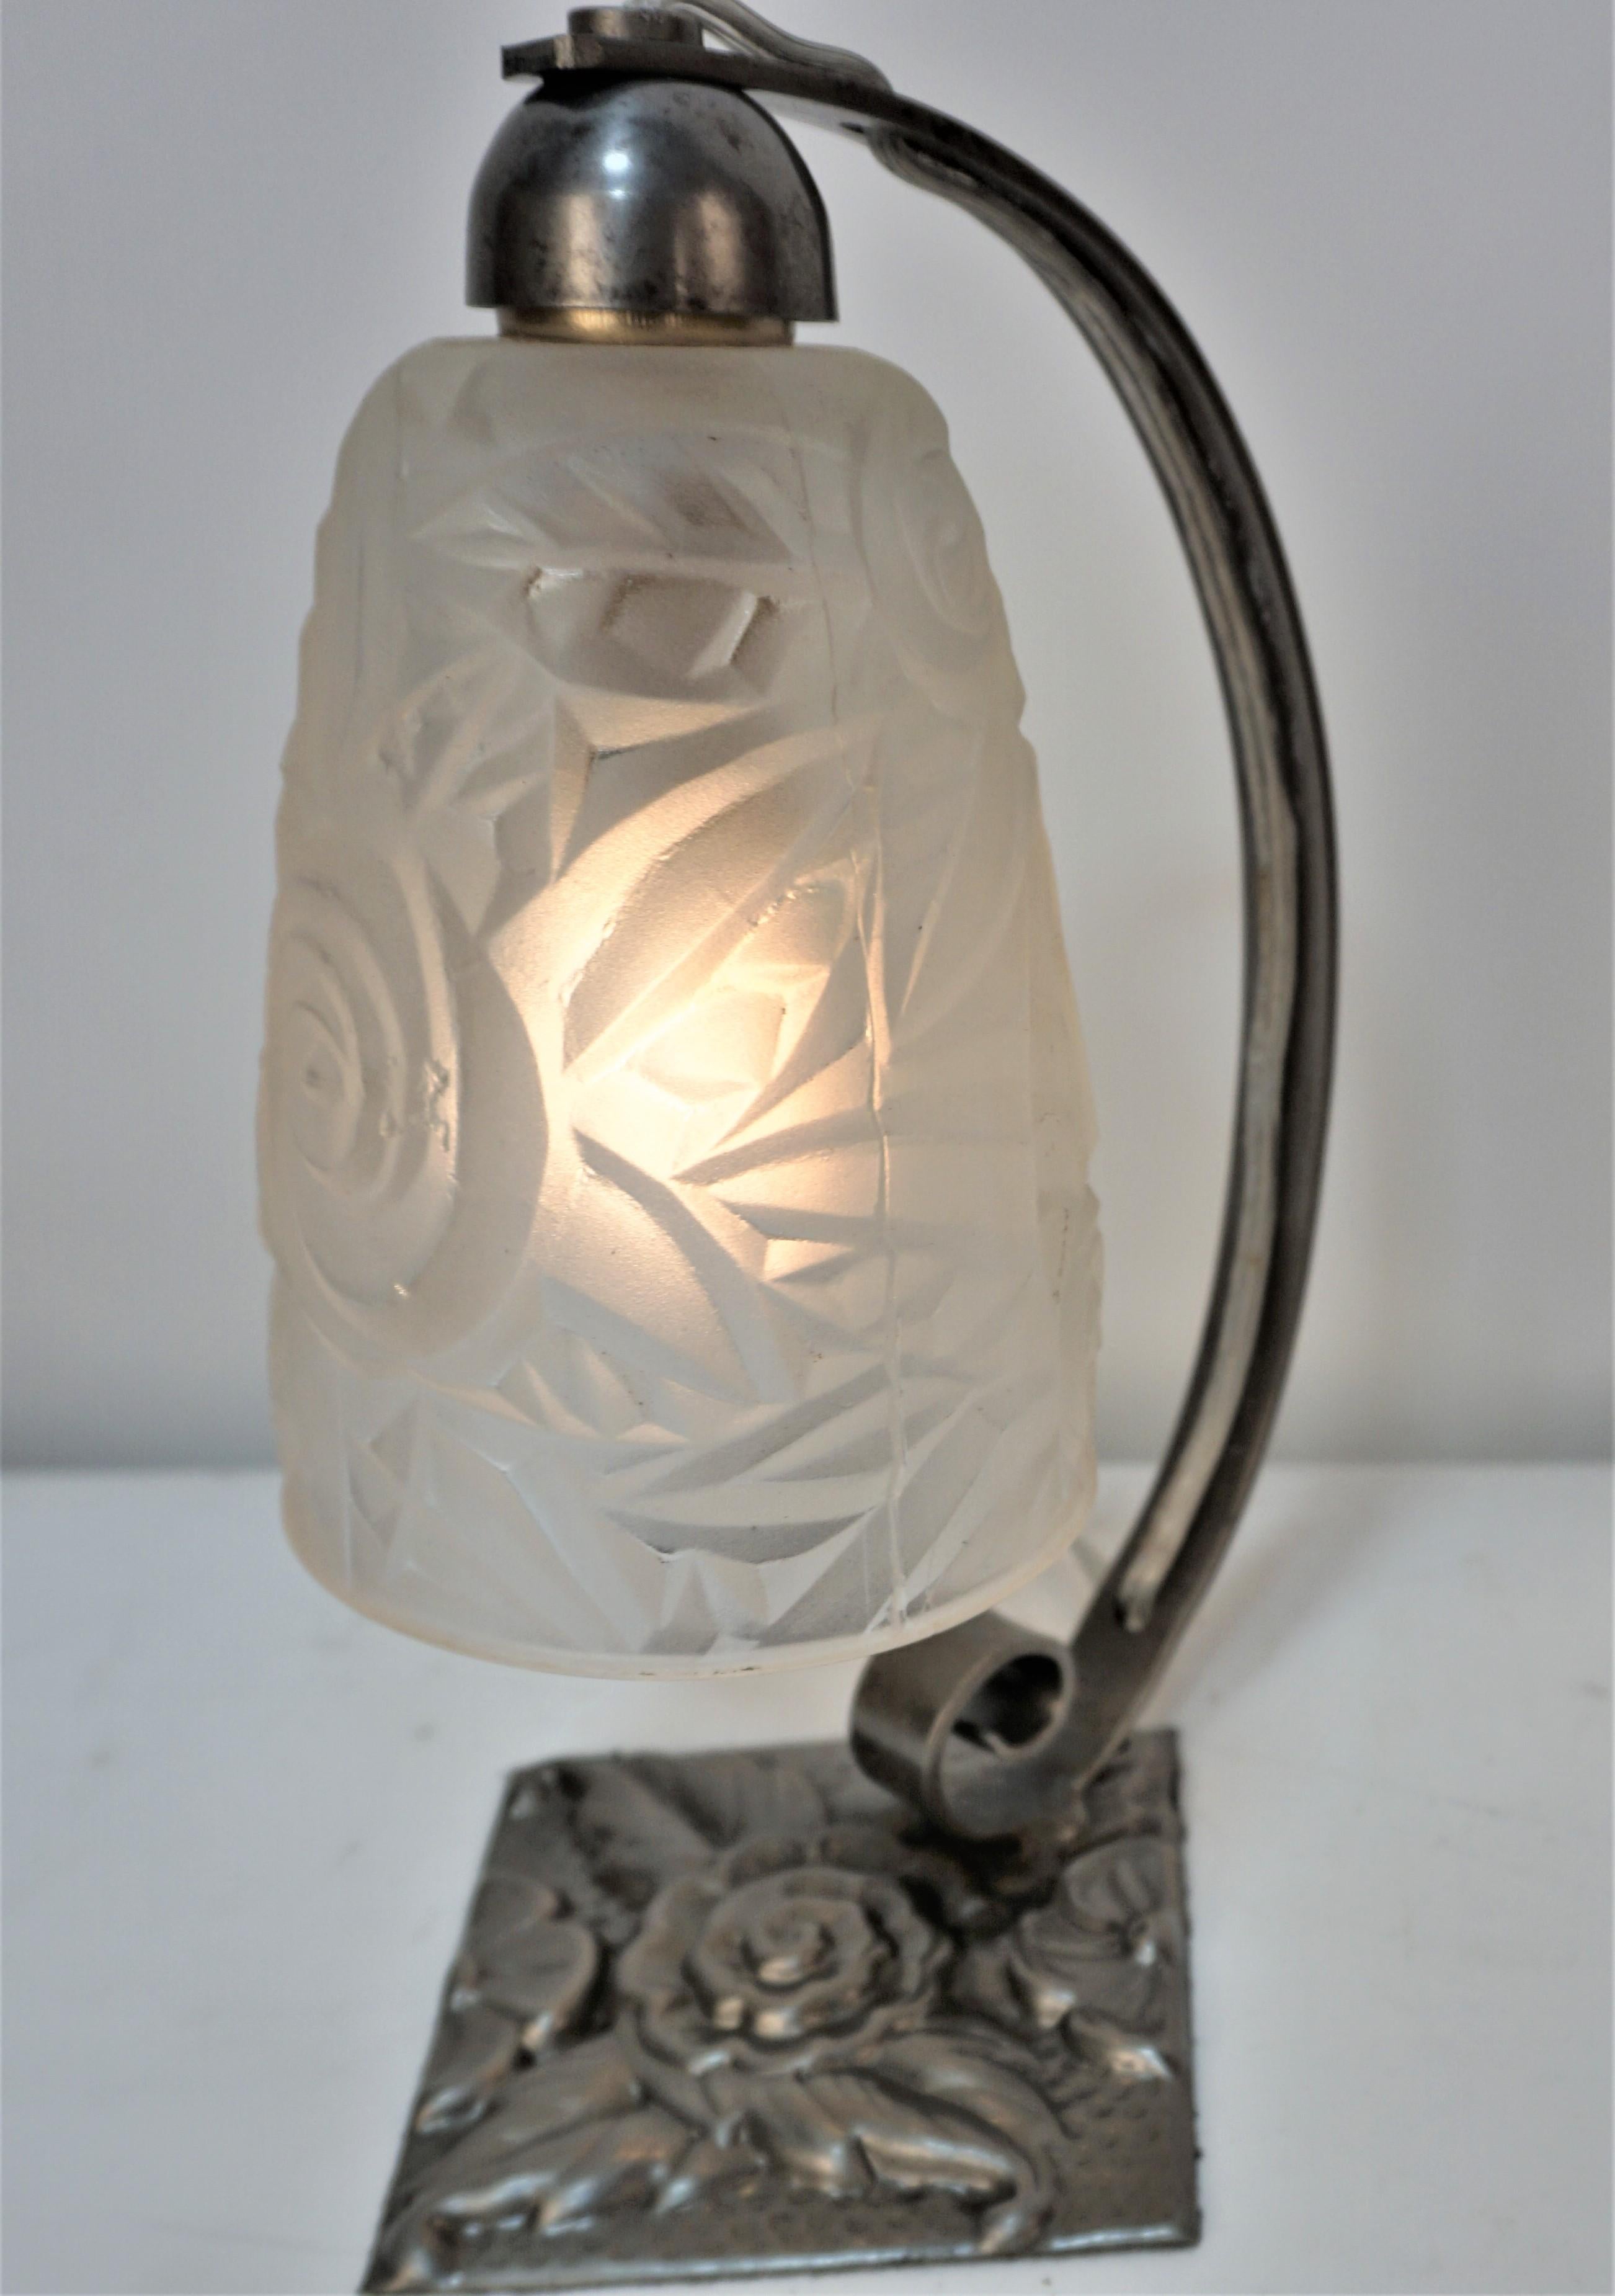  1920's cleat frost glass Art Deco table lamp by Jean Noverdy (Dijon), France.
Base is handmade iron,
 